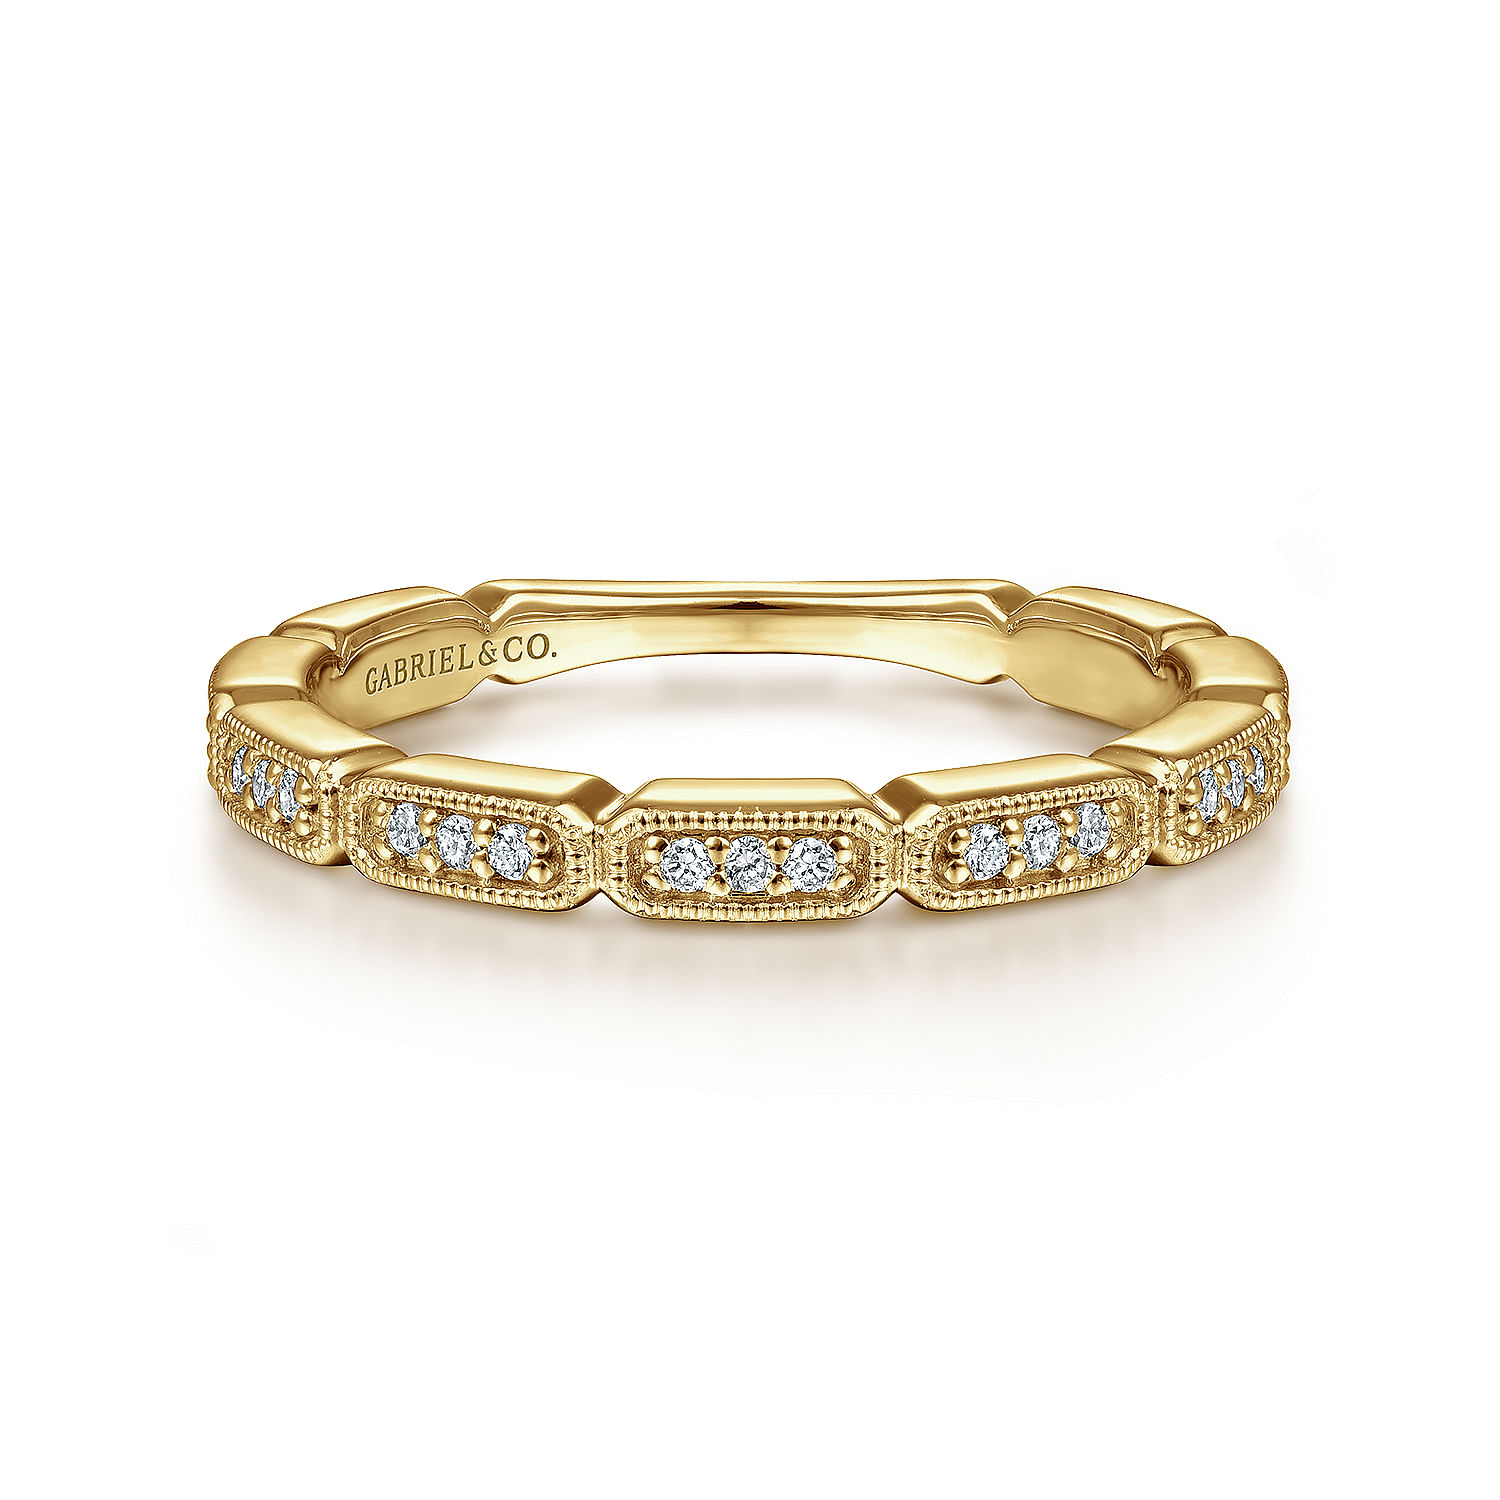 Gabriel & Co.14K Yellow Gold Diamond Stackable Ring